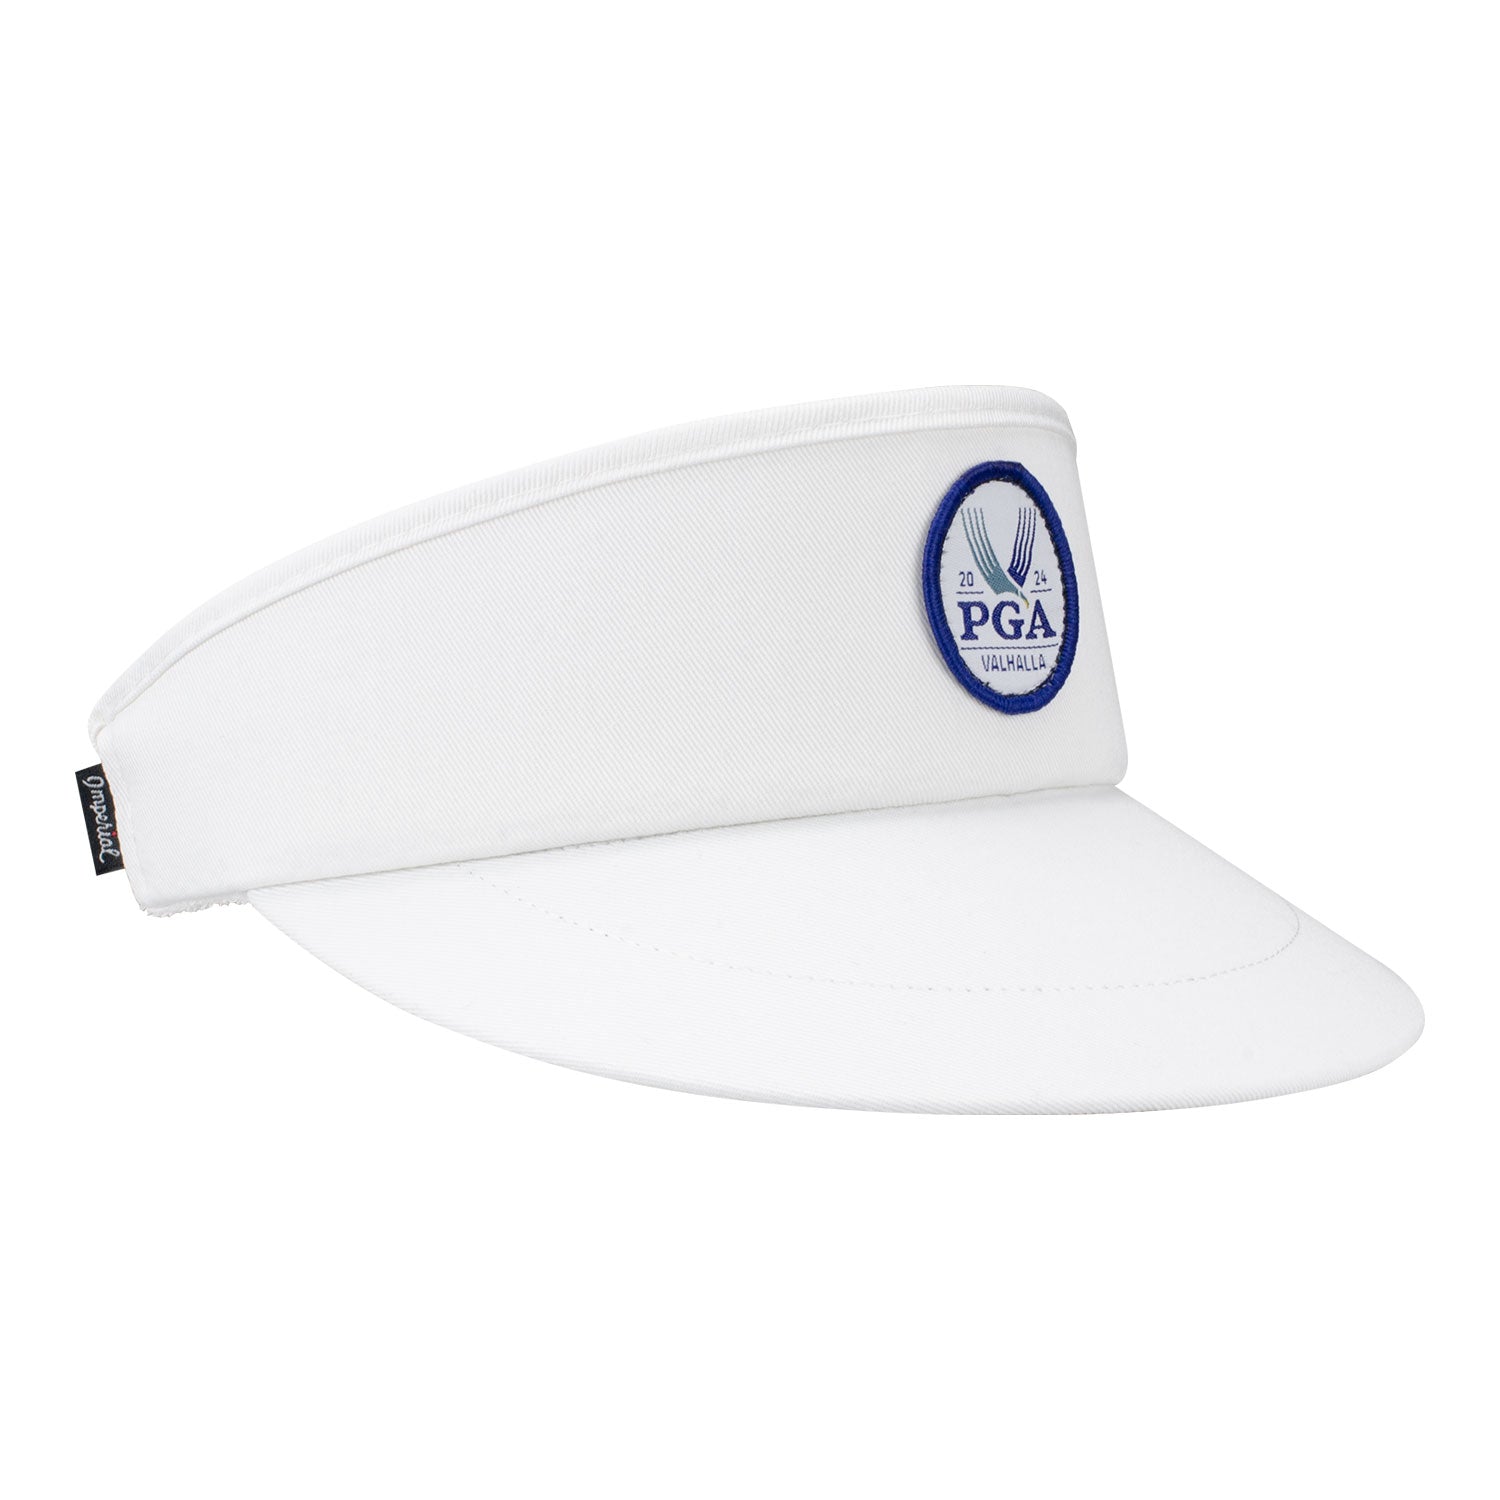 Imperial 3161 - The Original Tour Visor in White - Angled Front Left View